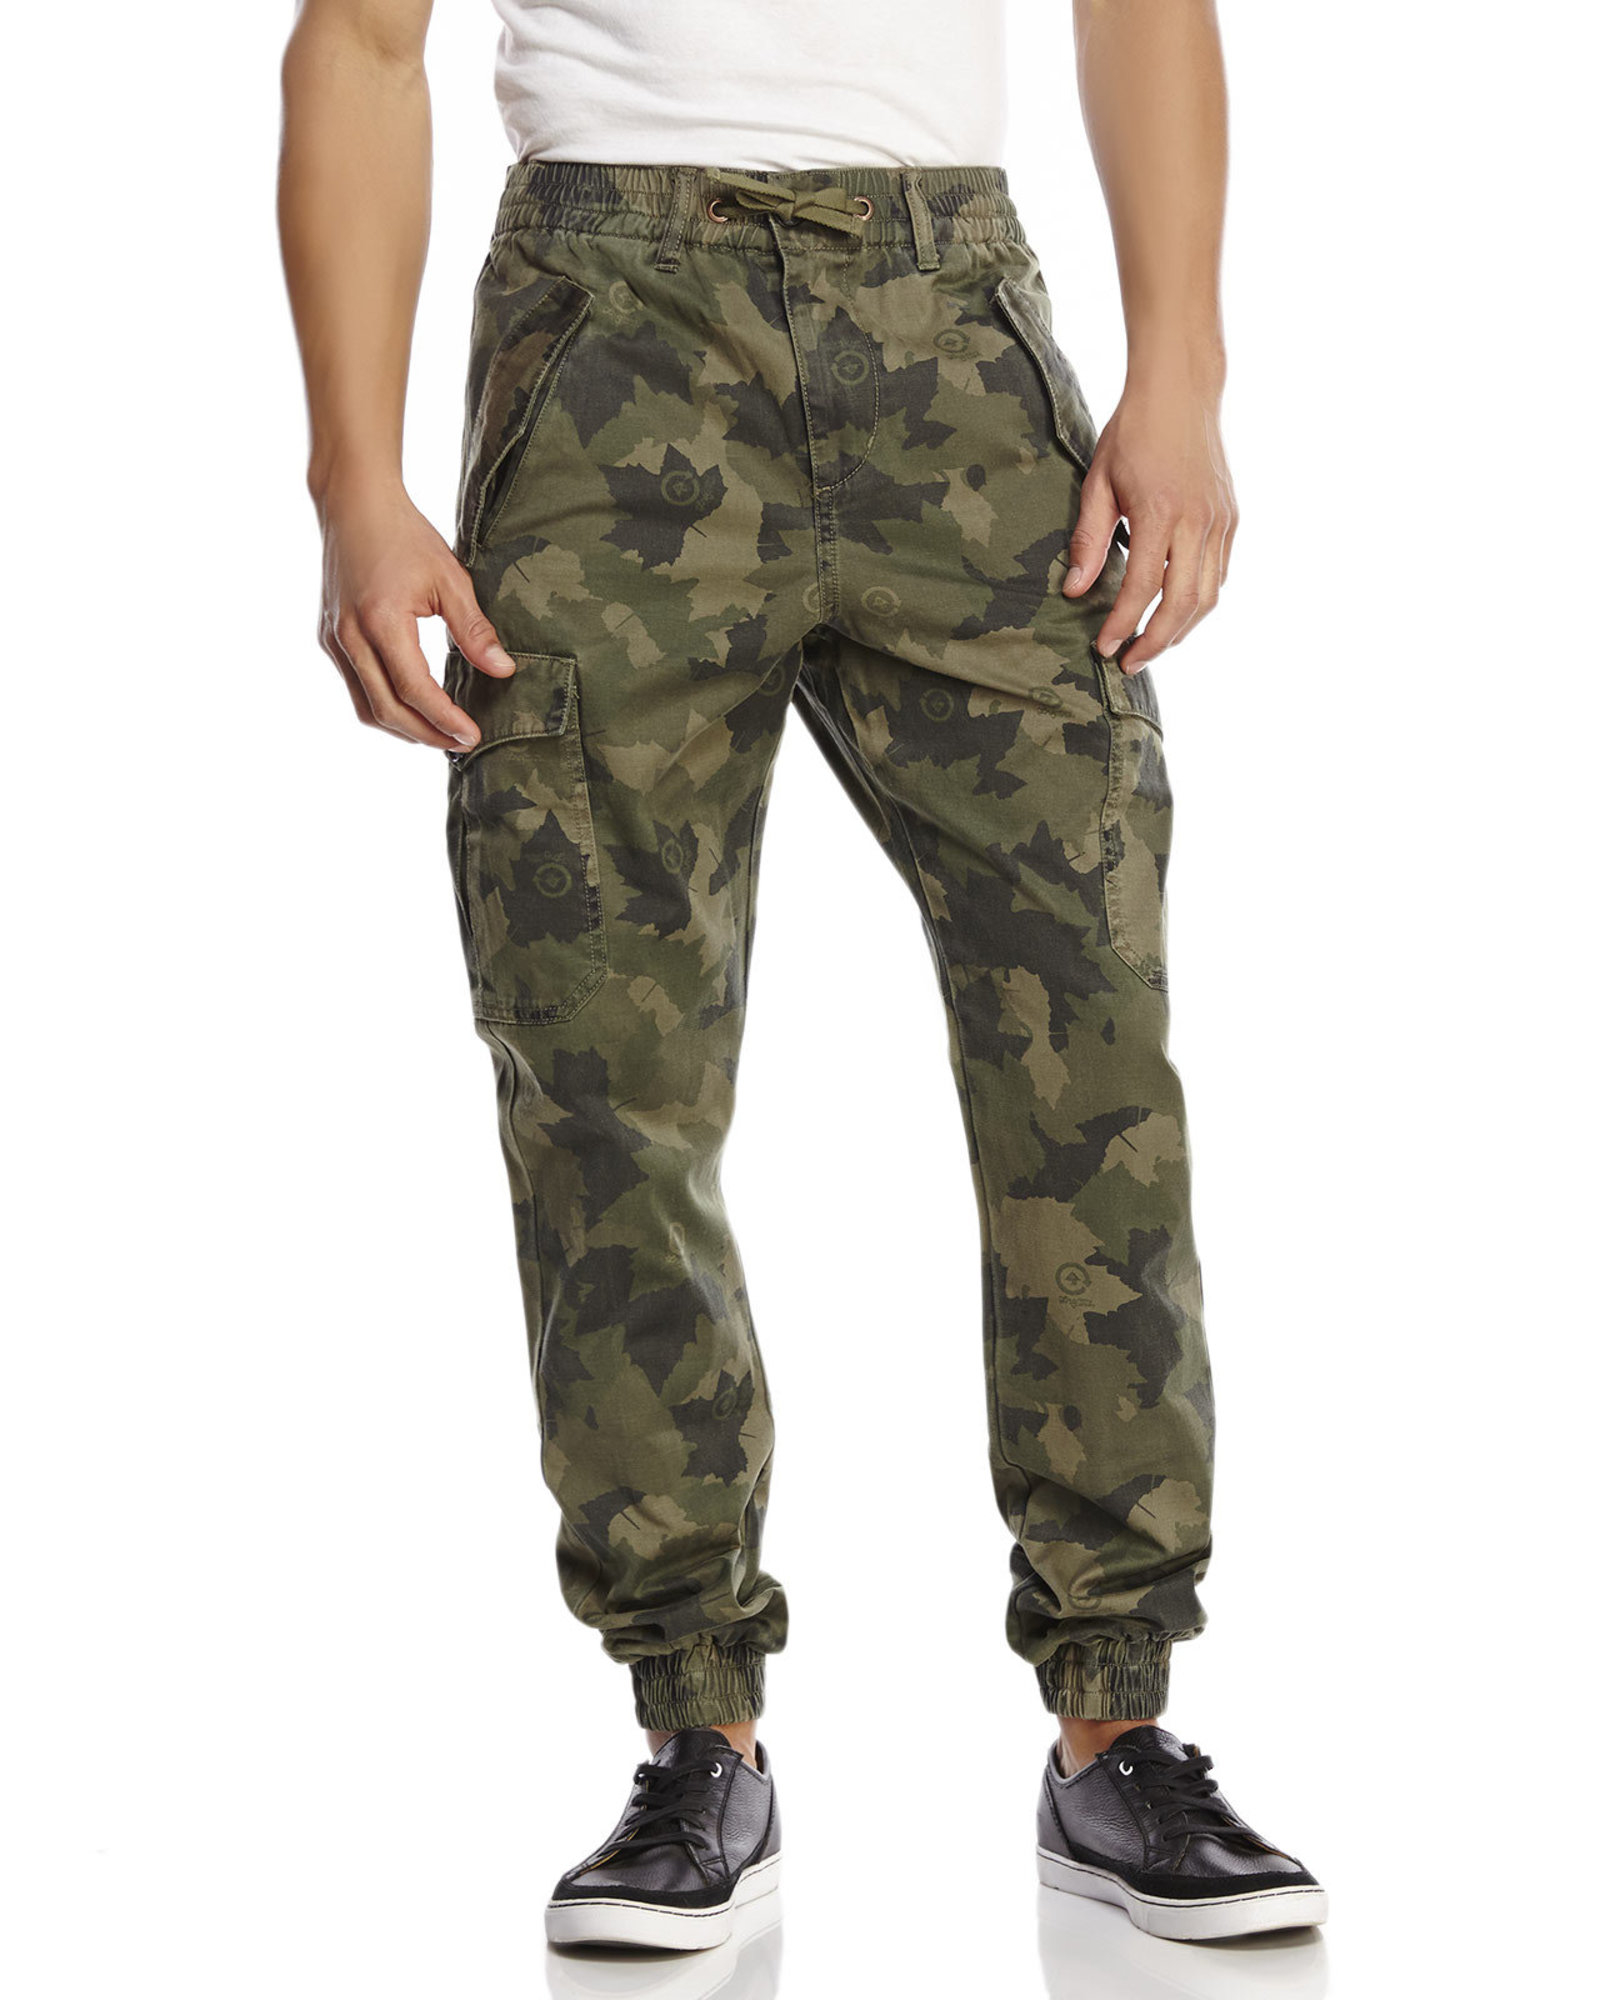 Lyst - Lrg Wasteland Camouflage Cargo Jogger Pants in Green for Men